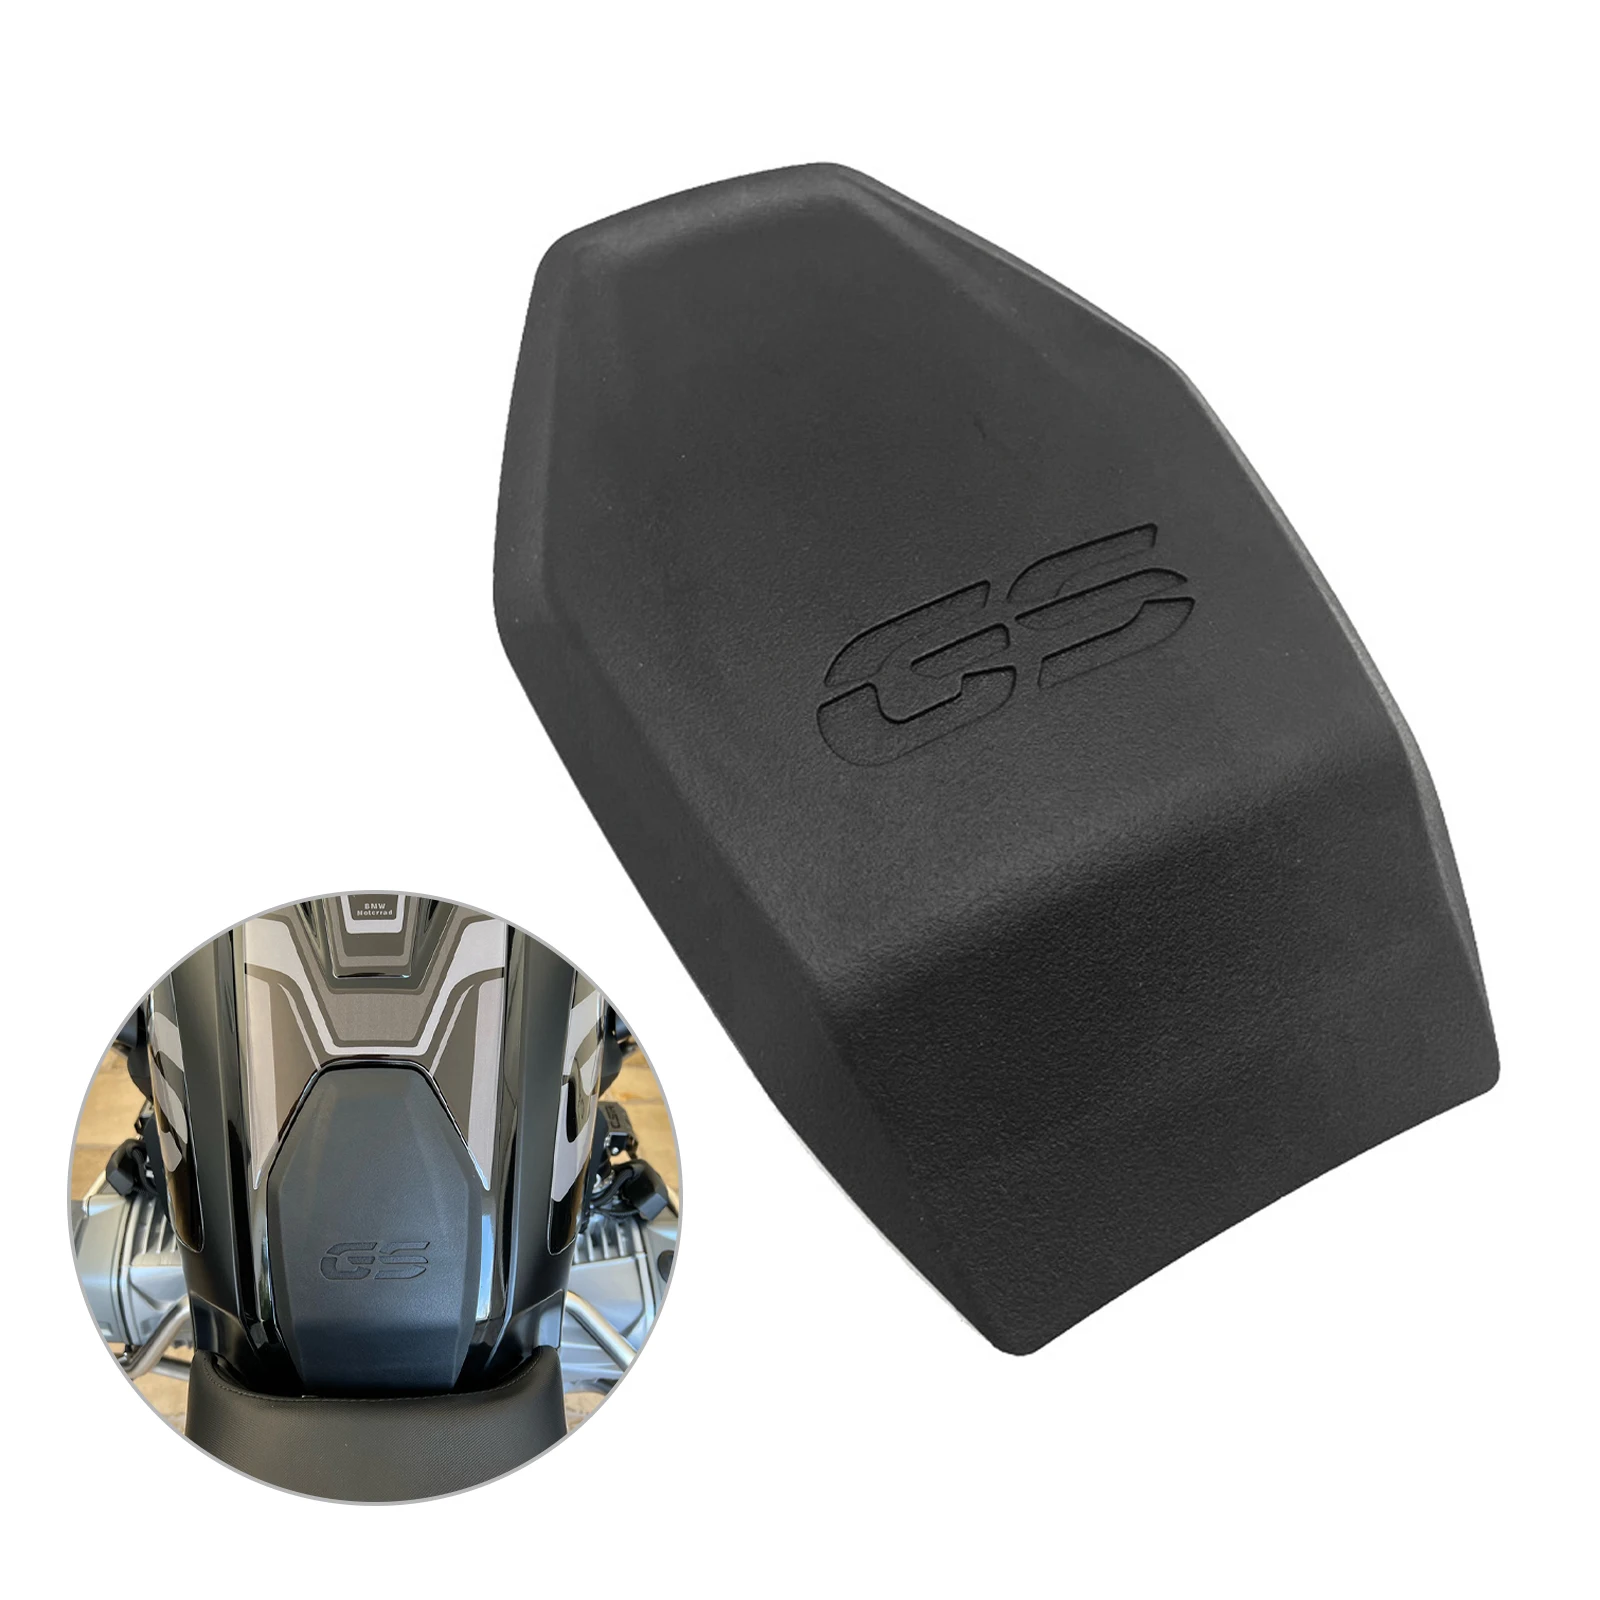 Fit For BMW R1250GS R1200GS R 1250 GS 2013 - 2021 Motorcycle Accessories Rubber Fuel Tank Pad Protector Cover Protection cap